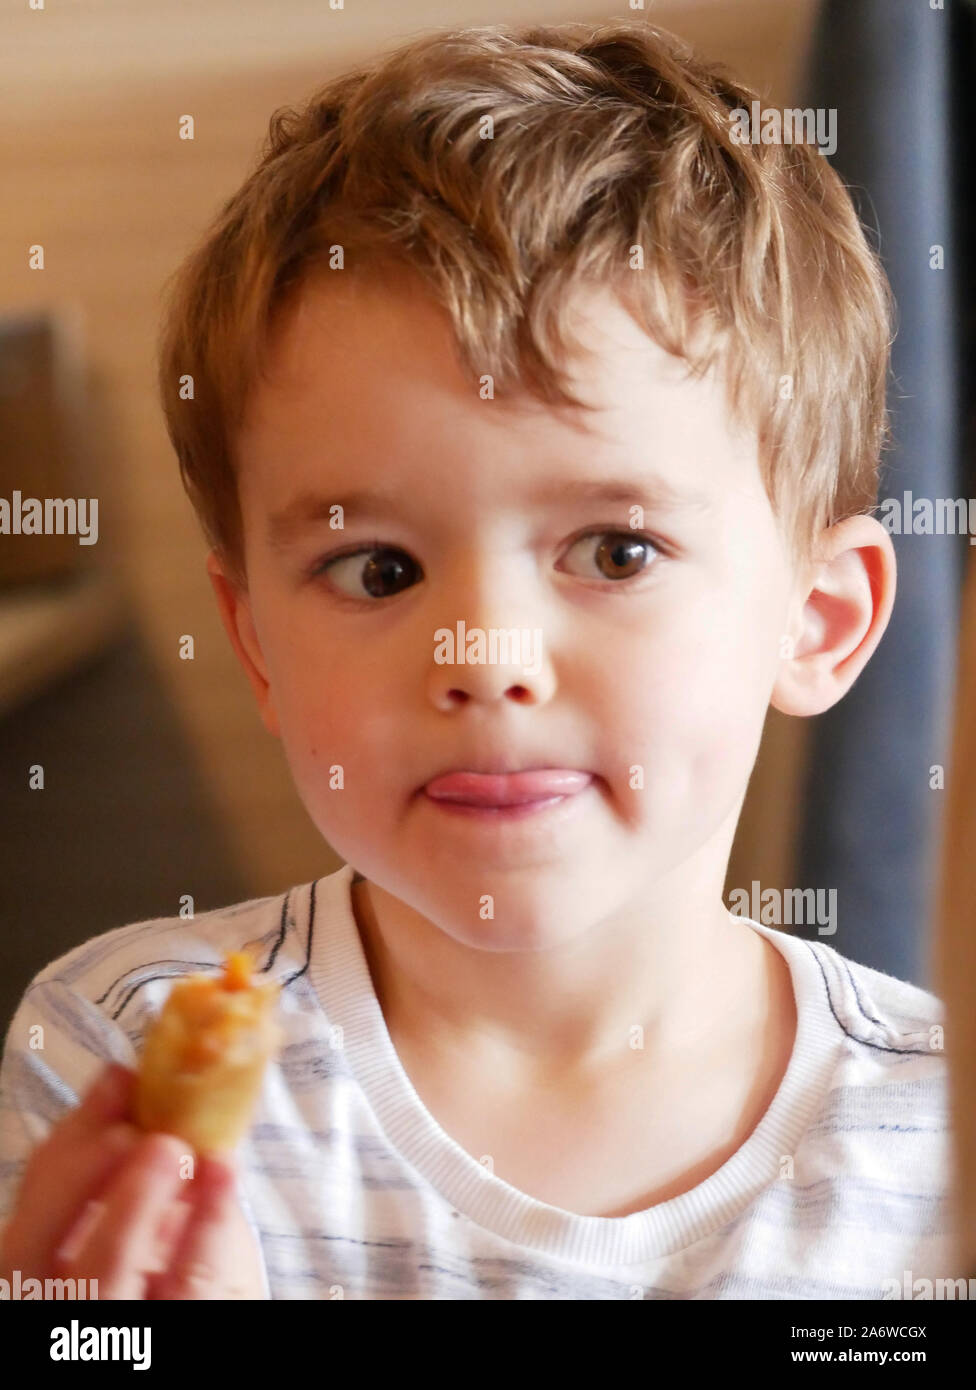 Young boy. Stock Photo